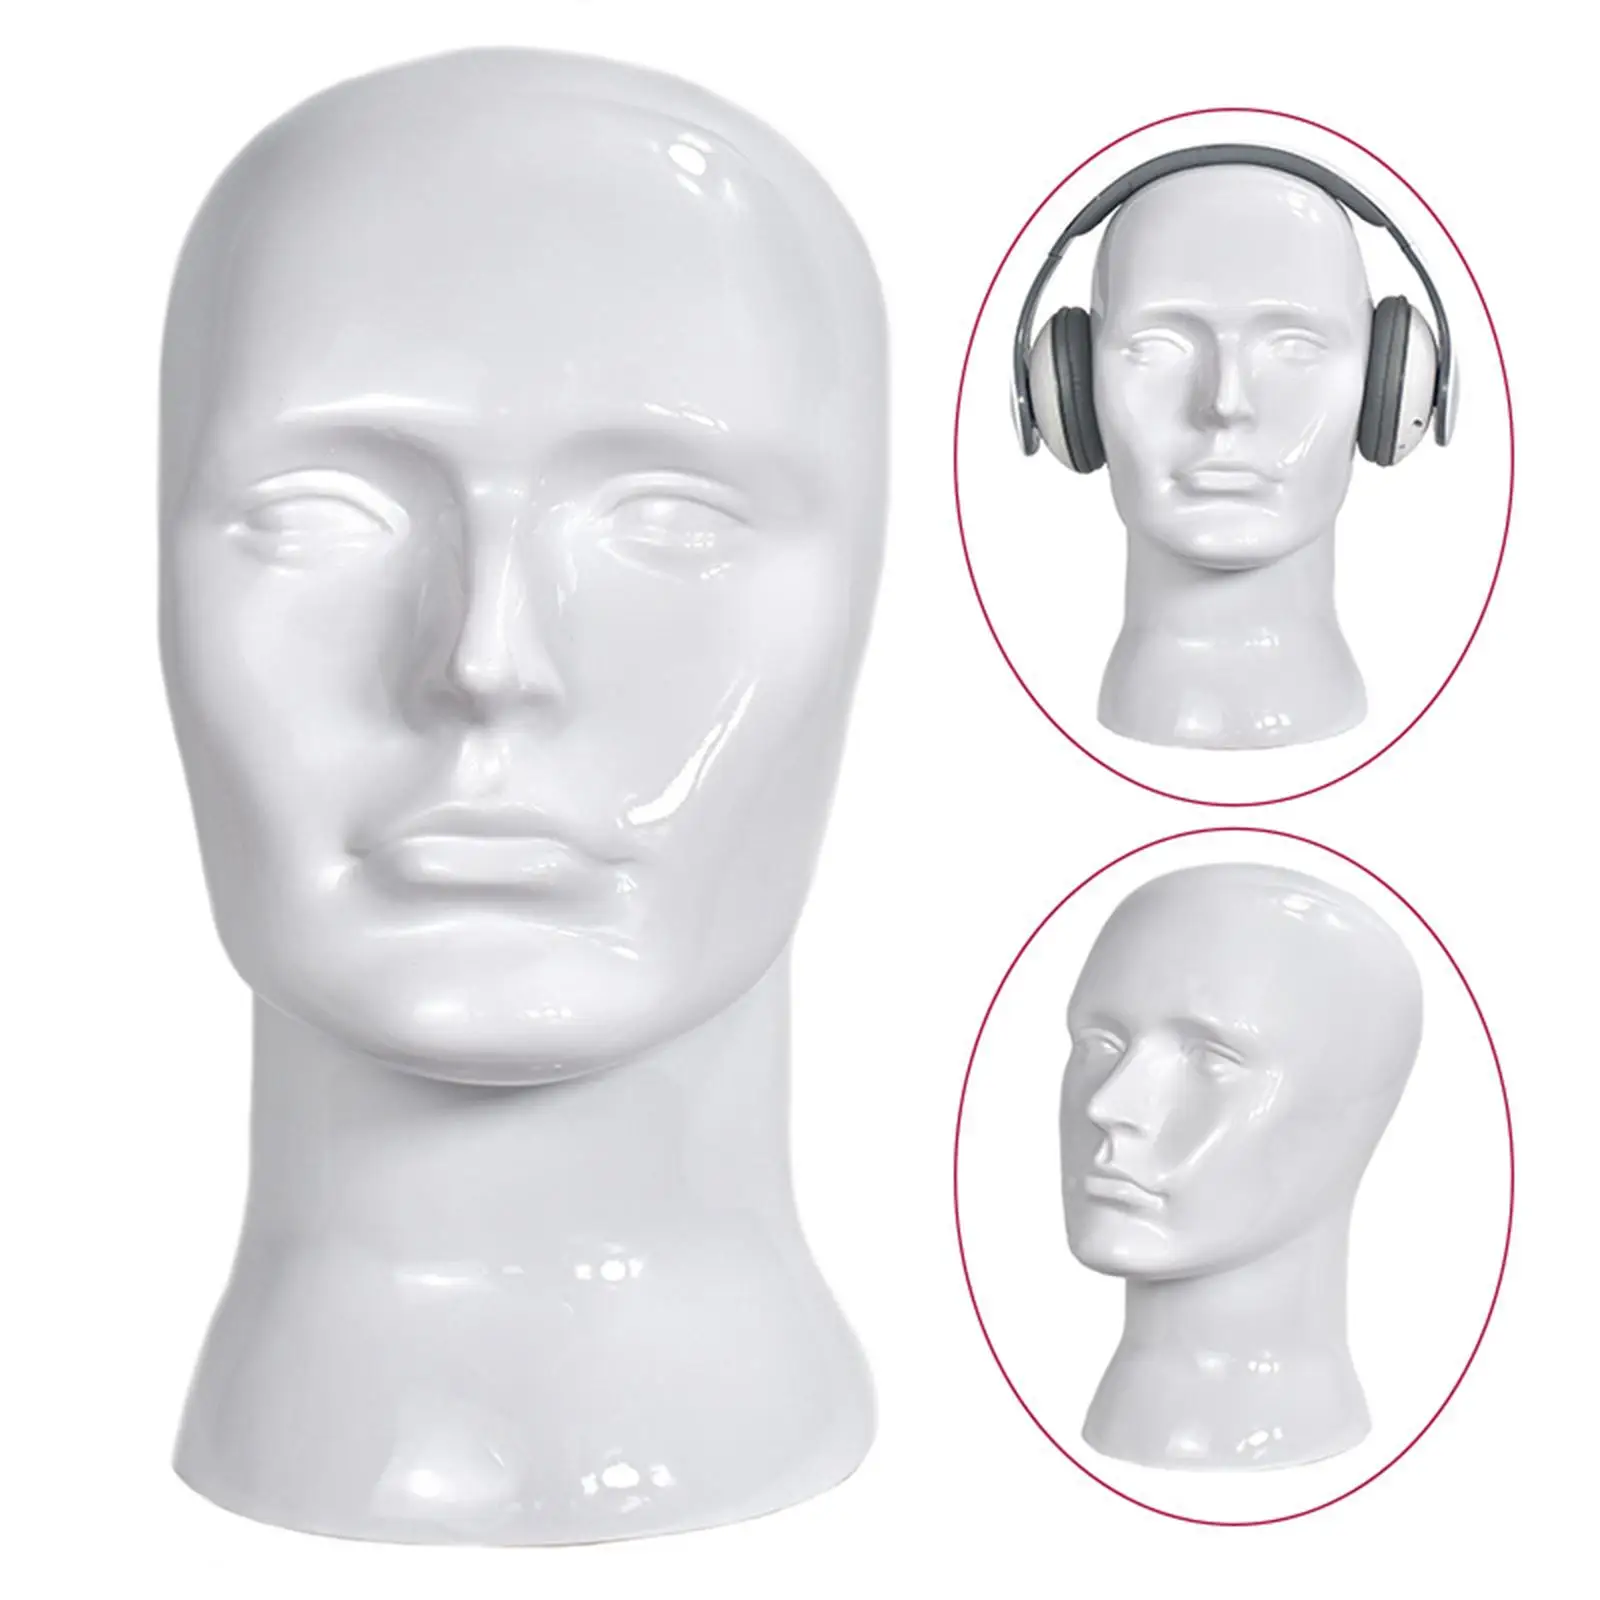 Male Mannequin Head Model, Easy to Carry Lightweight Display Mannequin Head for Home Display Hairpieces Hair Accessories